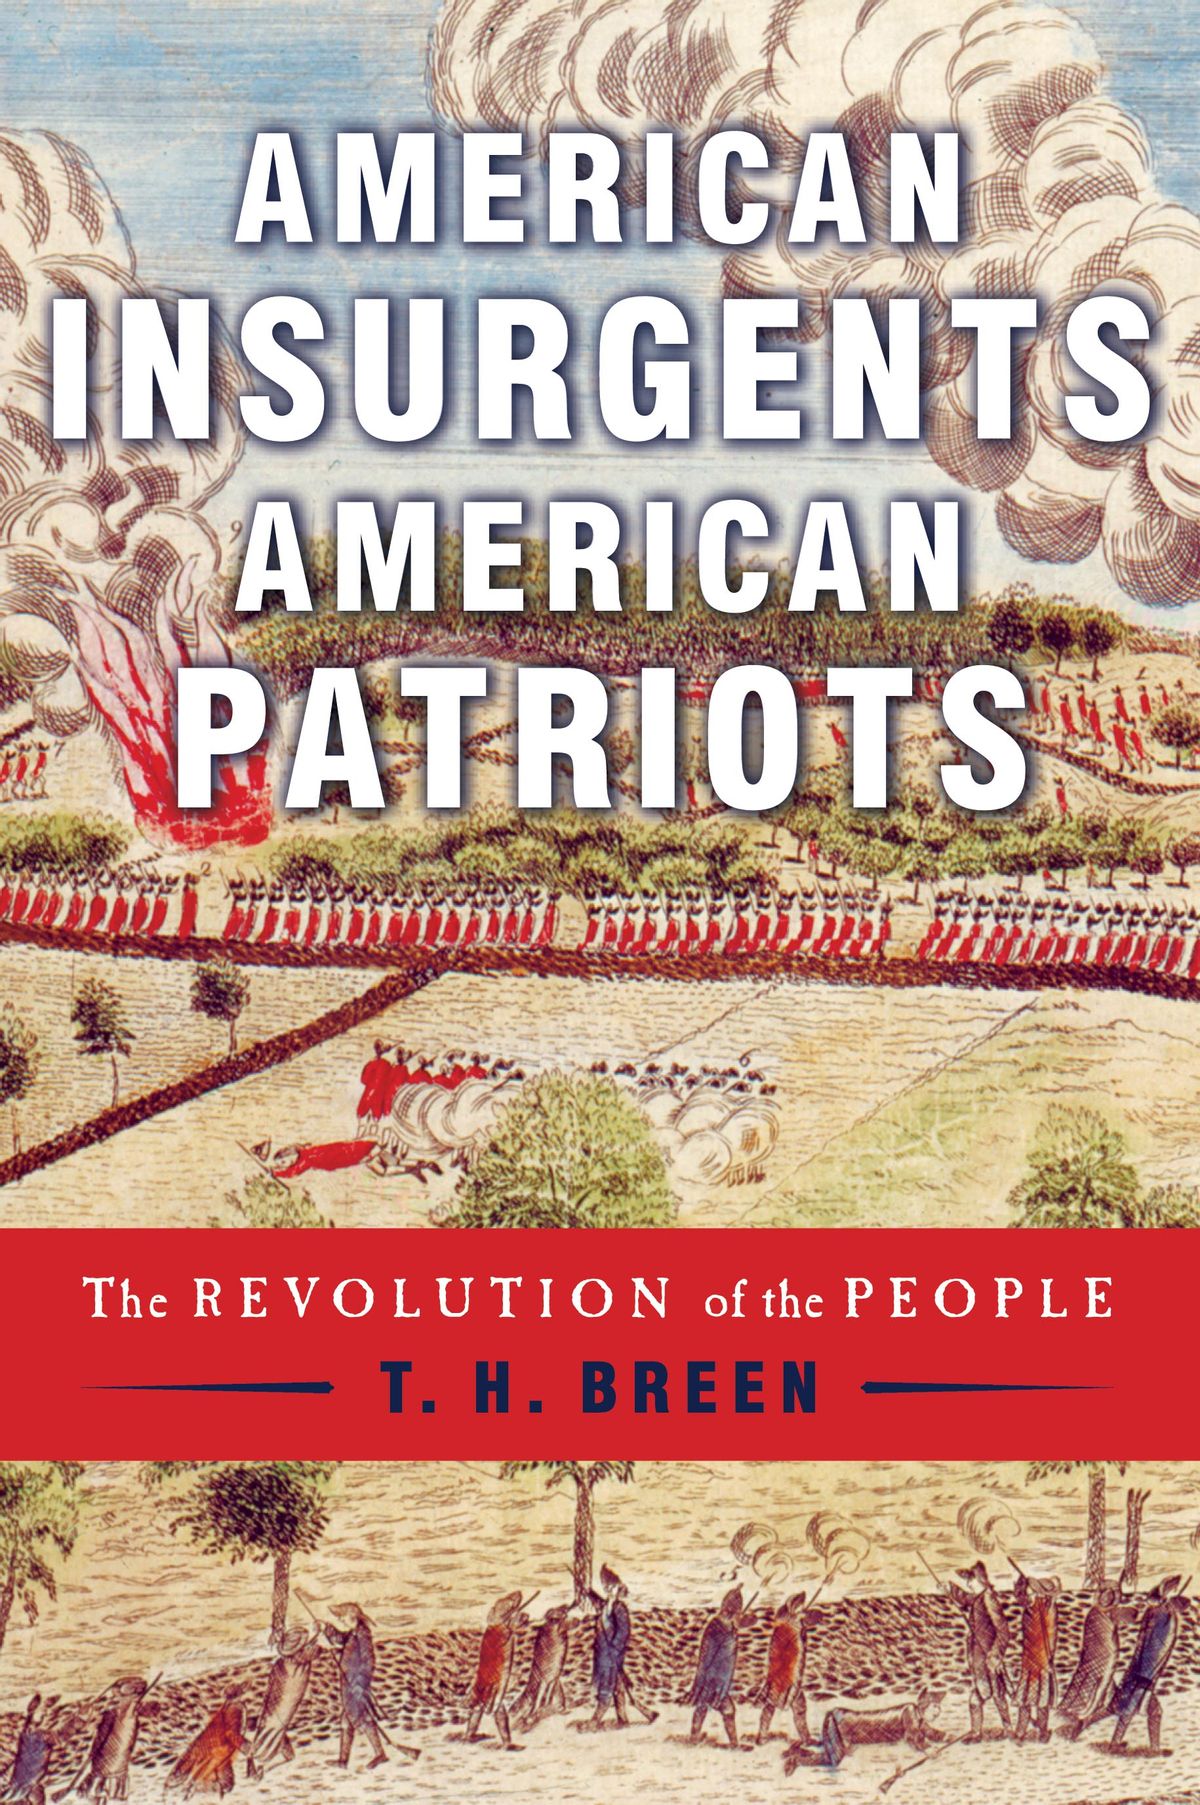 "American Insurgents, American Patriots," by T. H. Breen